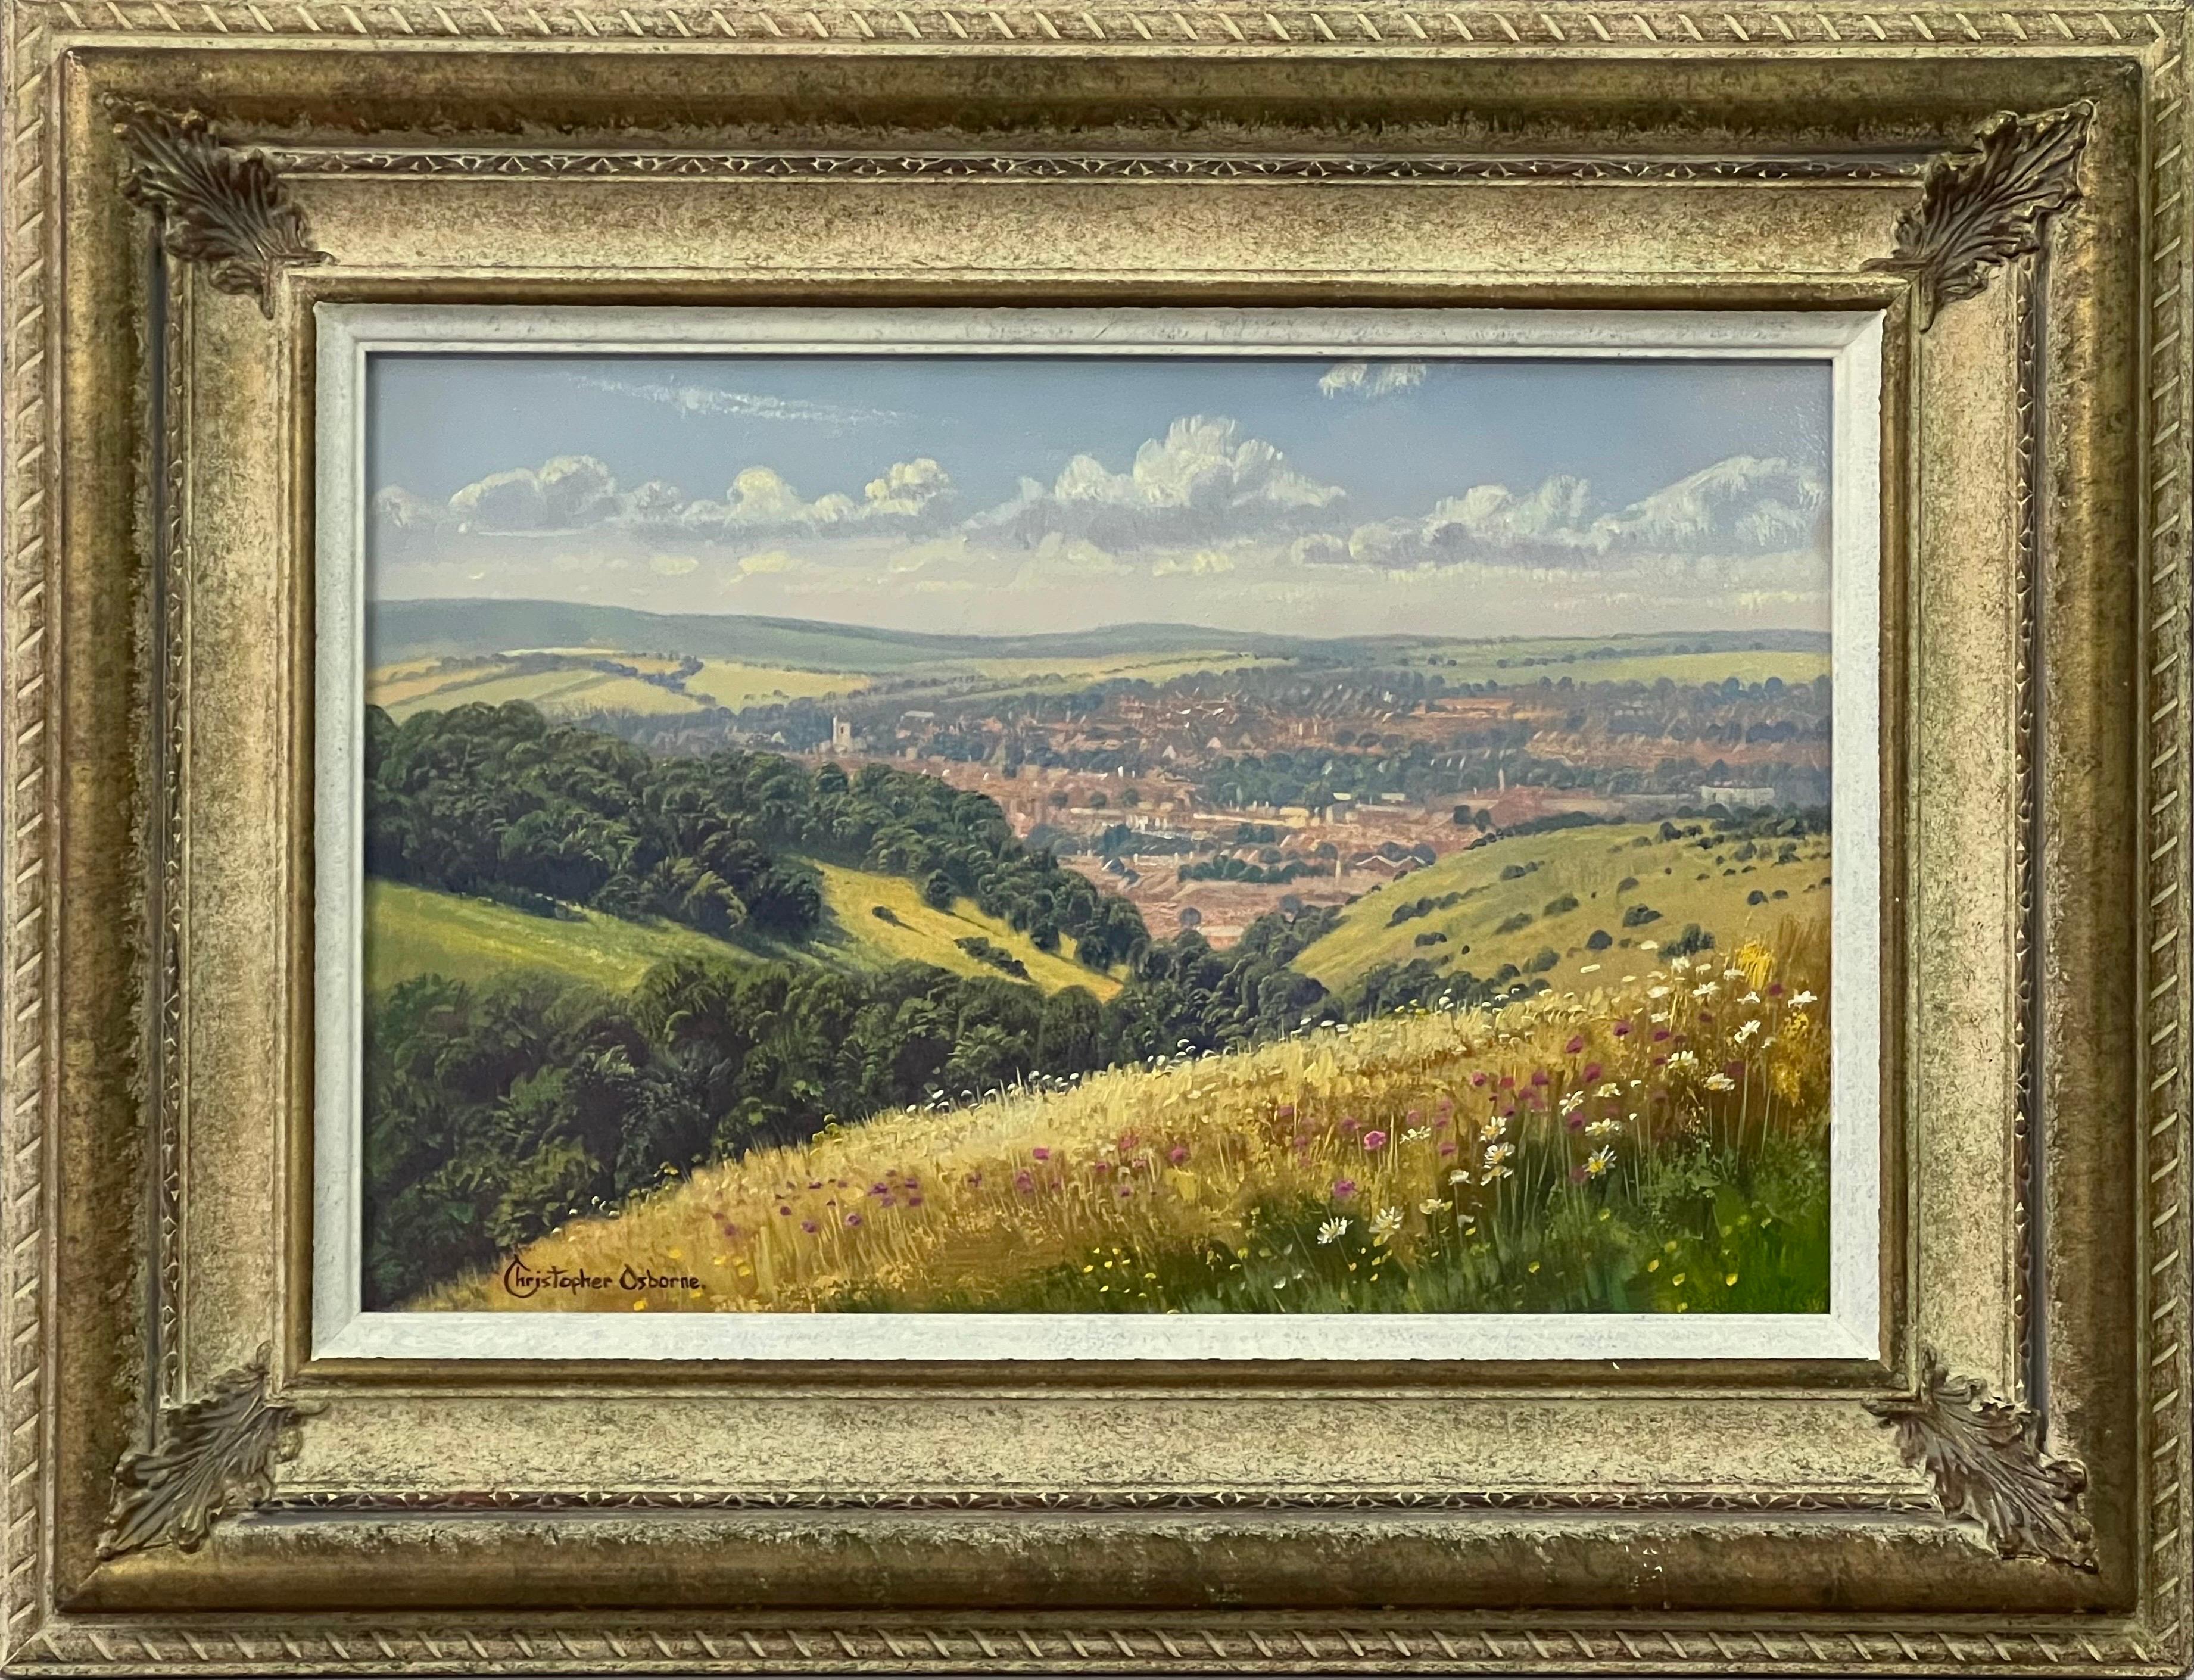 Christopher Osborne Landscape Painting - Elevated View of a Sussex Town in the Countryside of South England in Summer